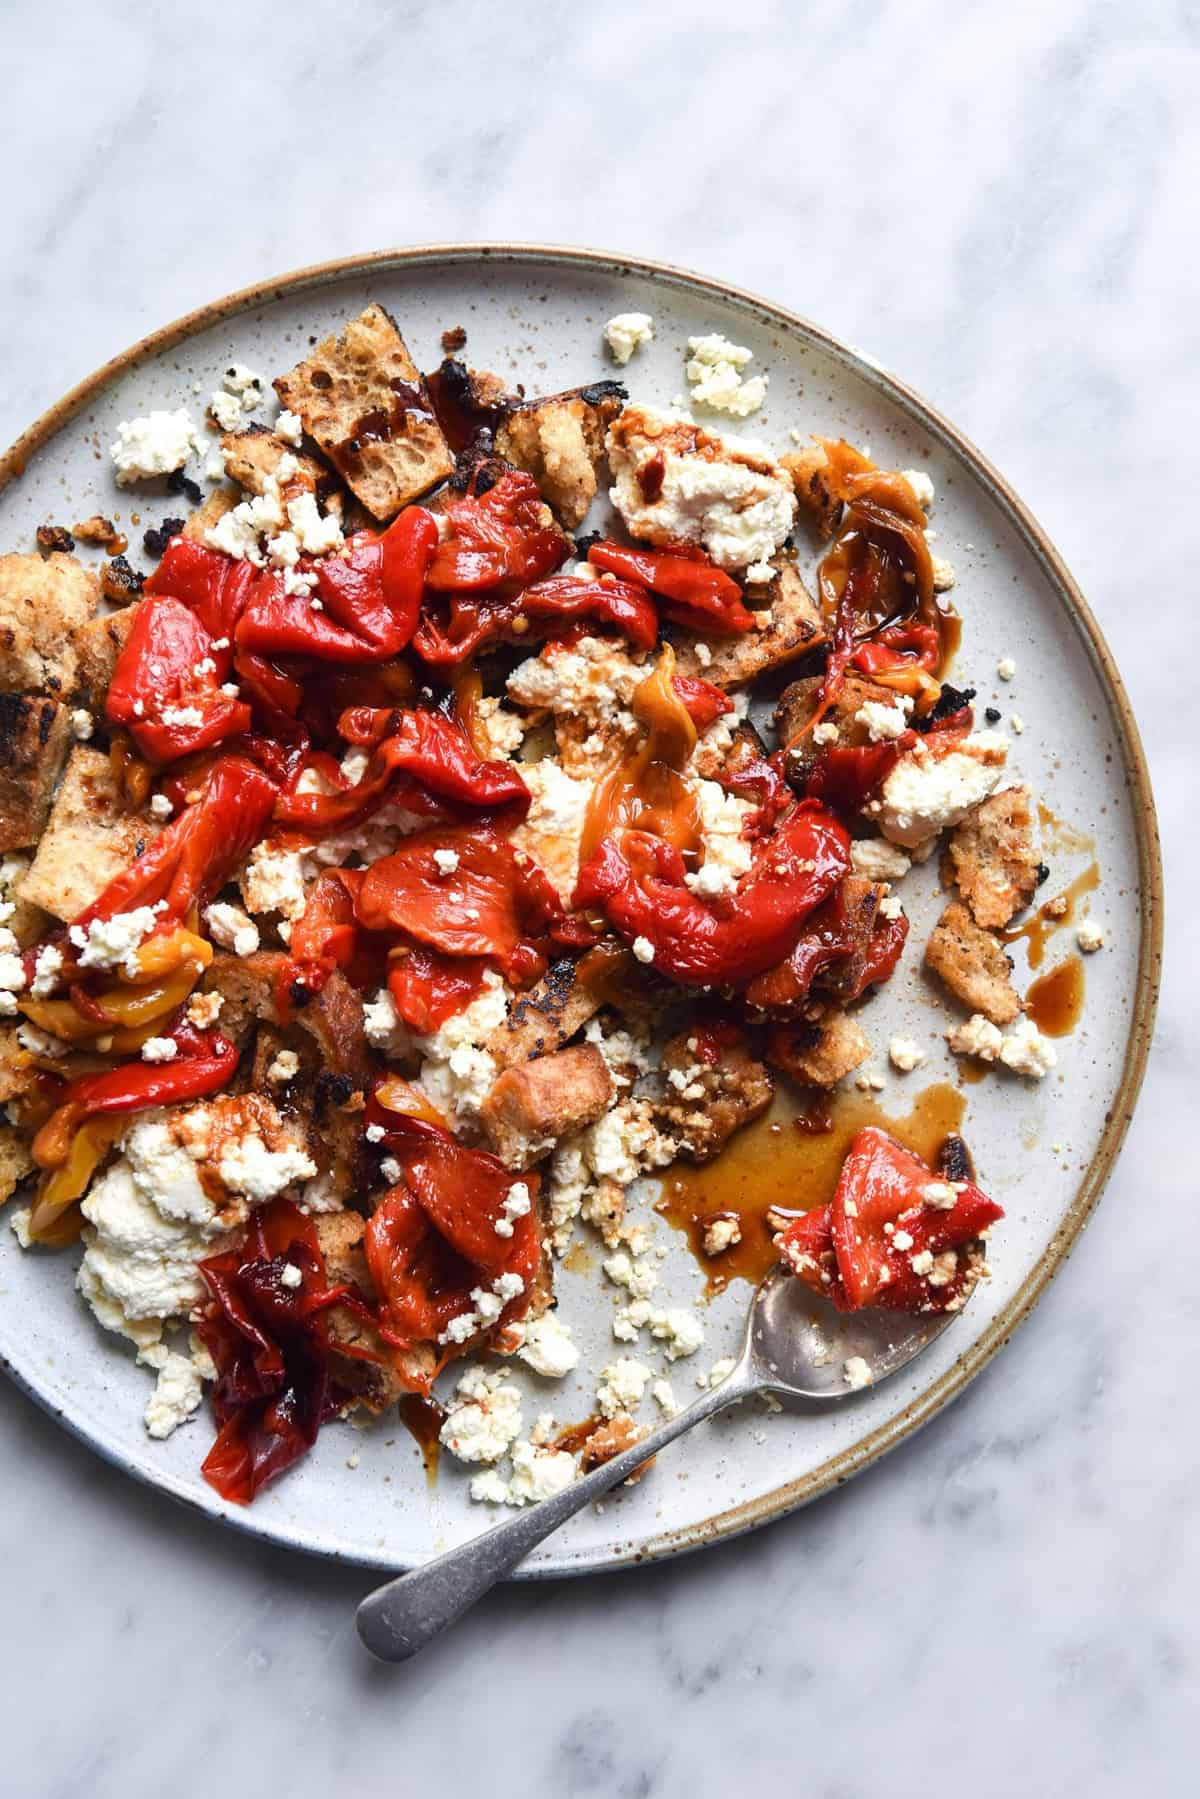 Roasted capsicum, lactose free ricotta, gluten free sourdough croutons and a caramelised capsicum and balsamic dressing. FODMAP friendly, gluten free and delicious. Recipe from www.georgeats.com